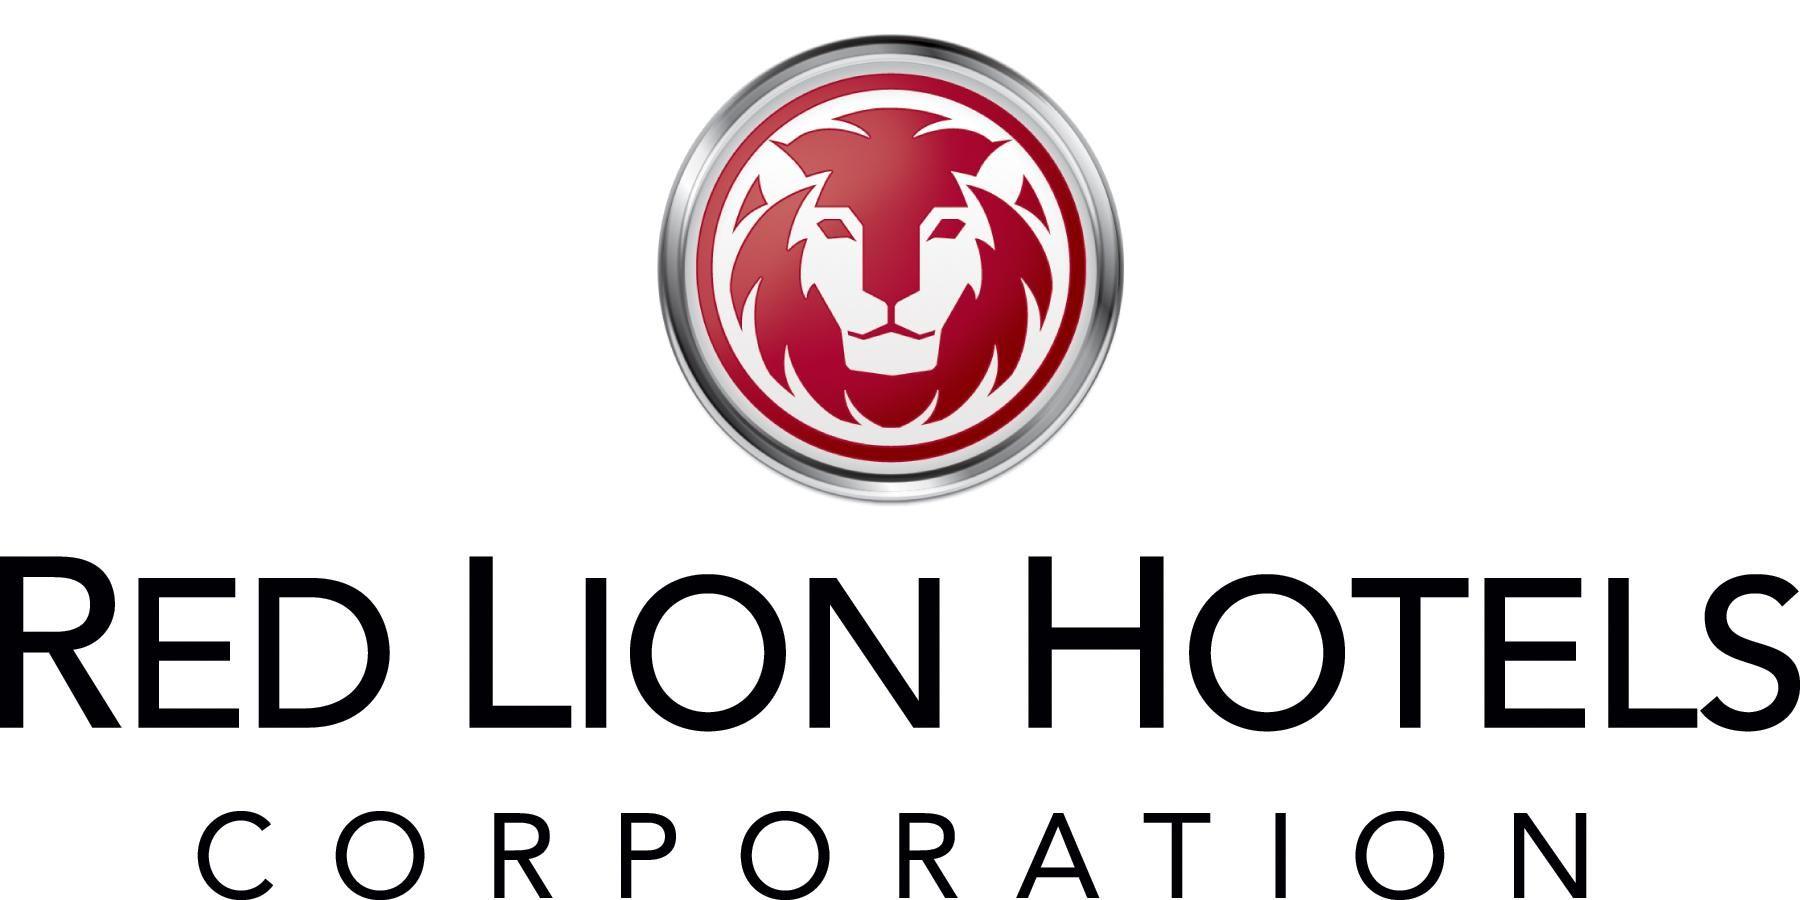 Red Lion Hotels Corporation Logo - Red Lion Hotels reports net loss for 2016 | The Spokesman-Review